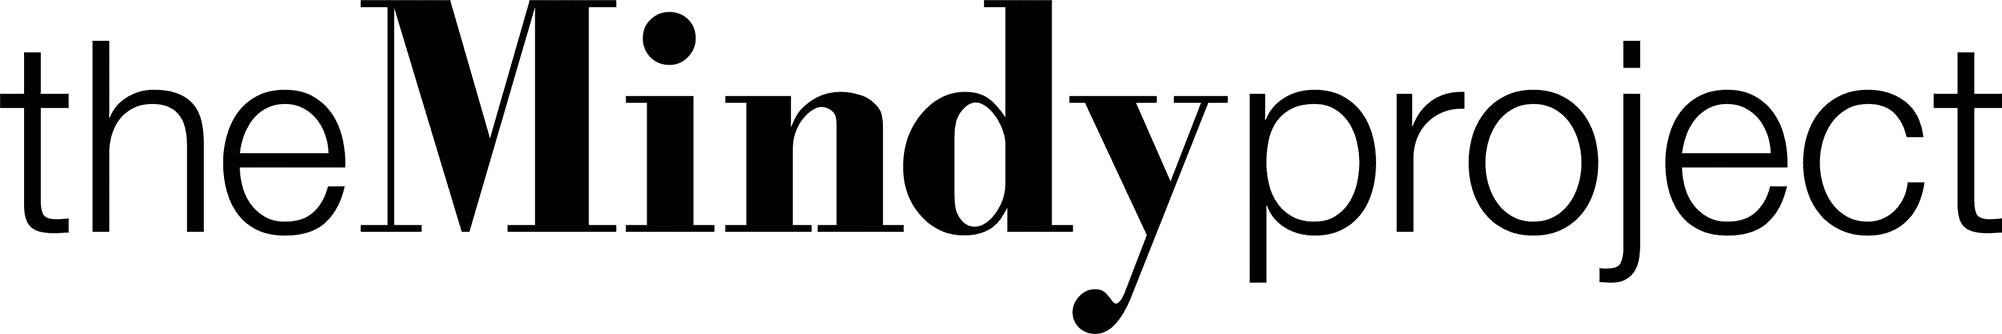 The Mindy Project logo